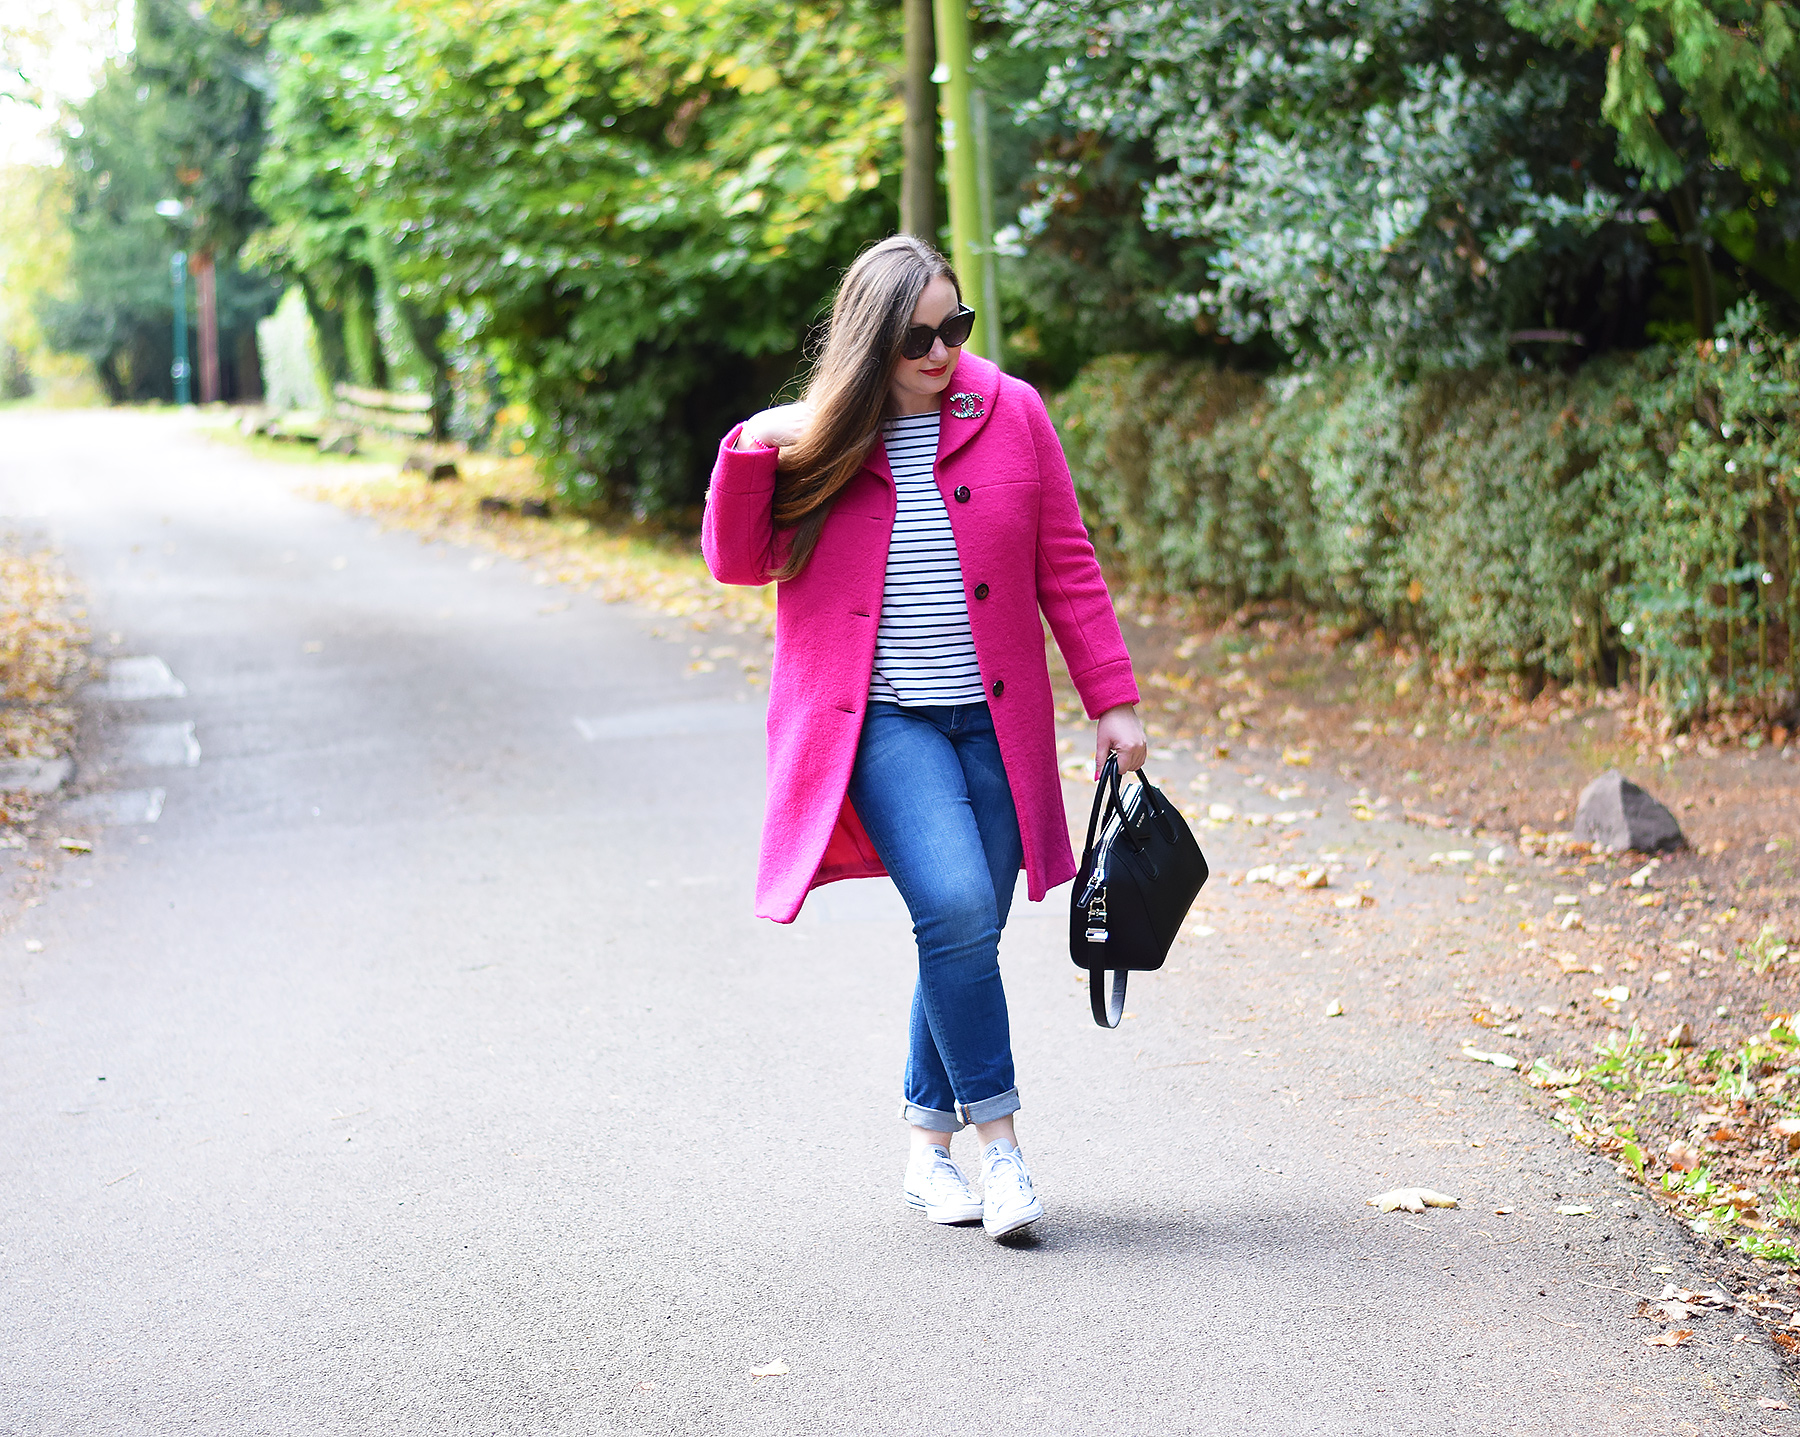 Bright pink coat over a striped top